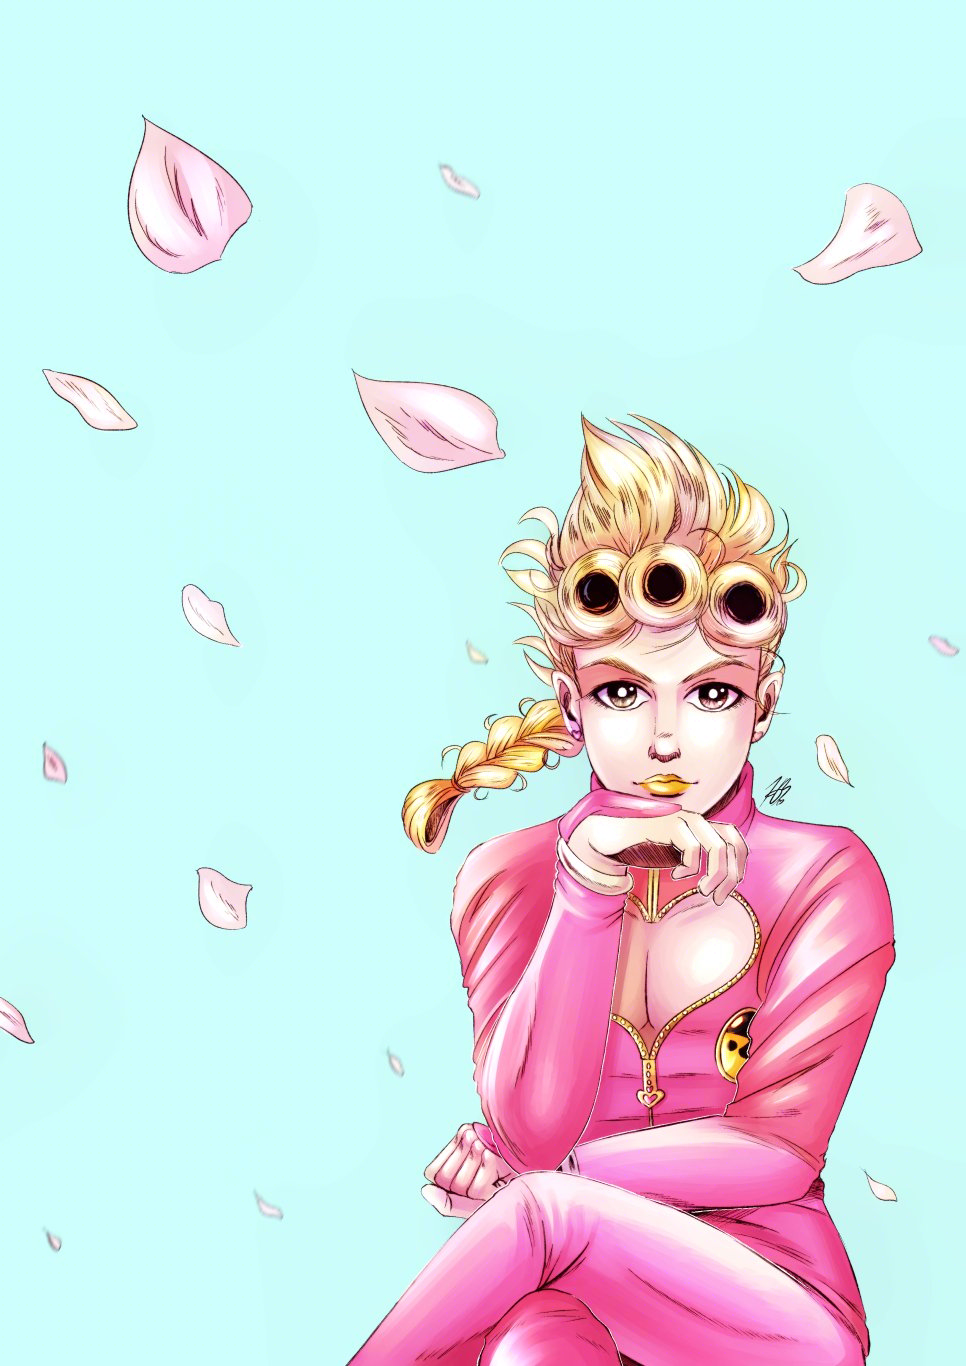 A digital anime illustration of Giorno Giovnna from Jojo's Bizarre Adventure. He is sitting down, legs crossed, with his hand on his chin, looking straight towards the viewer. He is wearing the pink version of his outfit. the background is plain bright, aqua blue, with cherry blossoms blowing in the breeze.